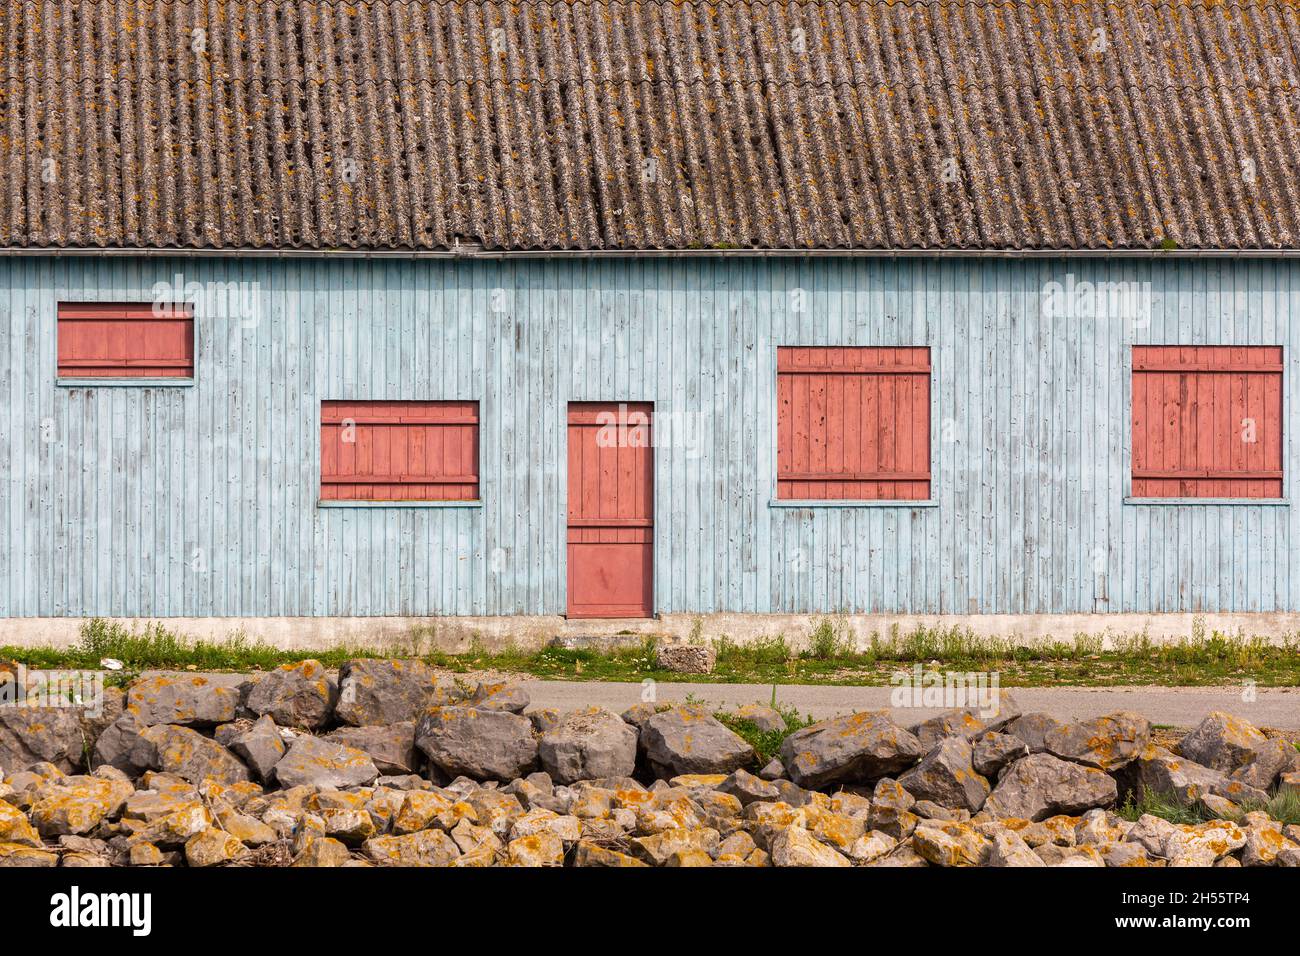 Wooden house painted in light blue, red doors and shutters. Cayeux-sur-Mer, Opal Coast, France Stock Photo